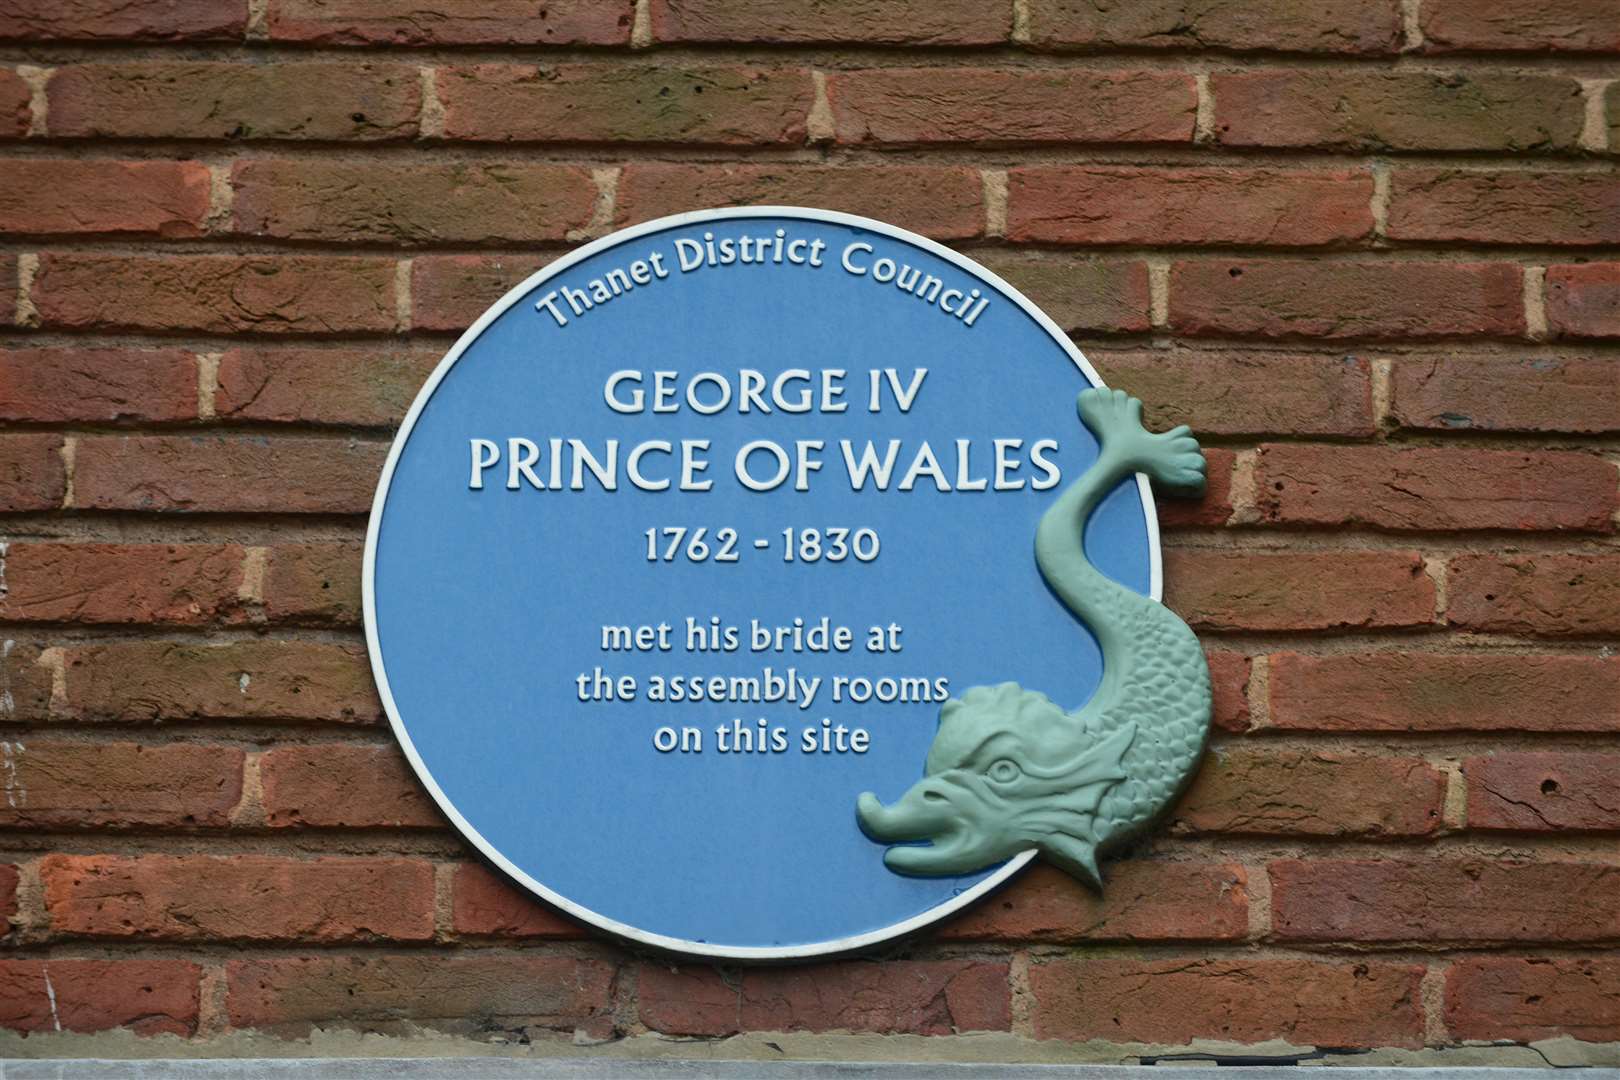 King George IV, Margate Public Library, Cecil Street